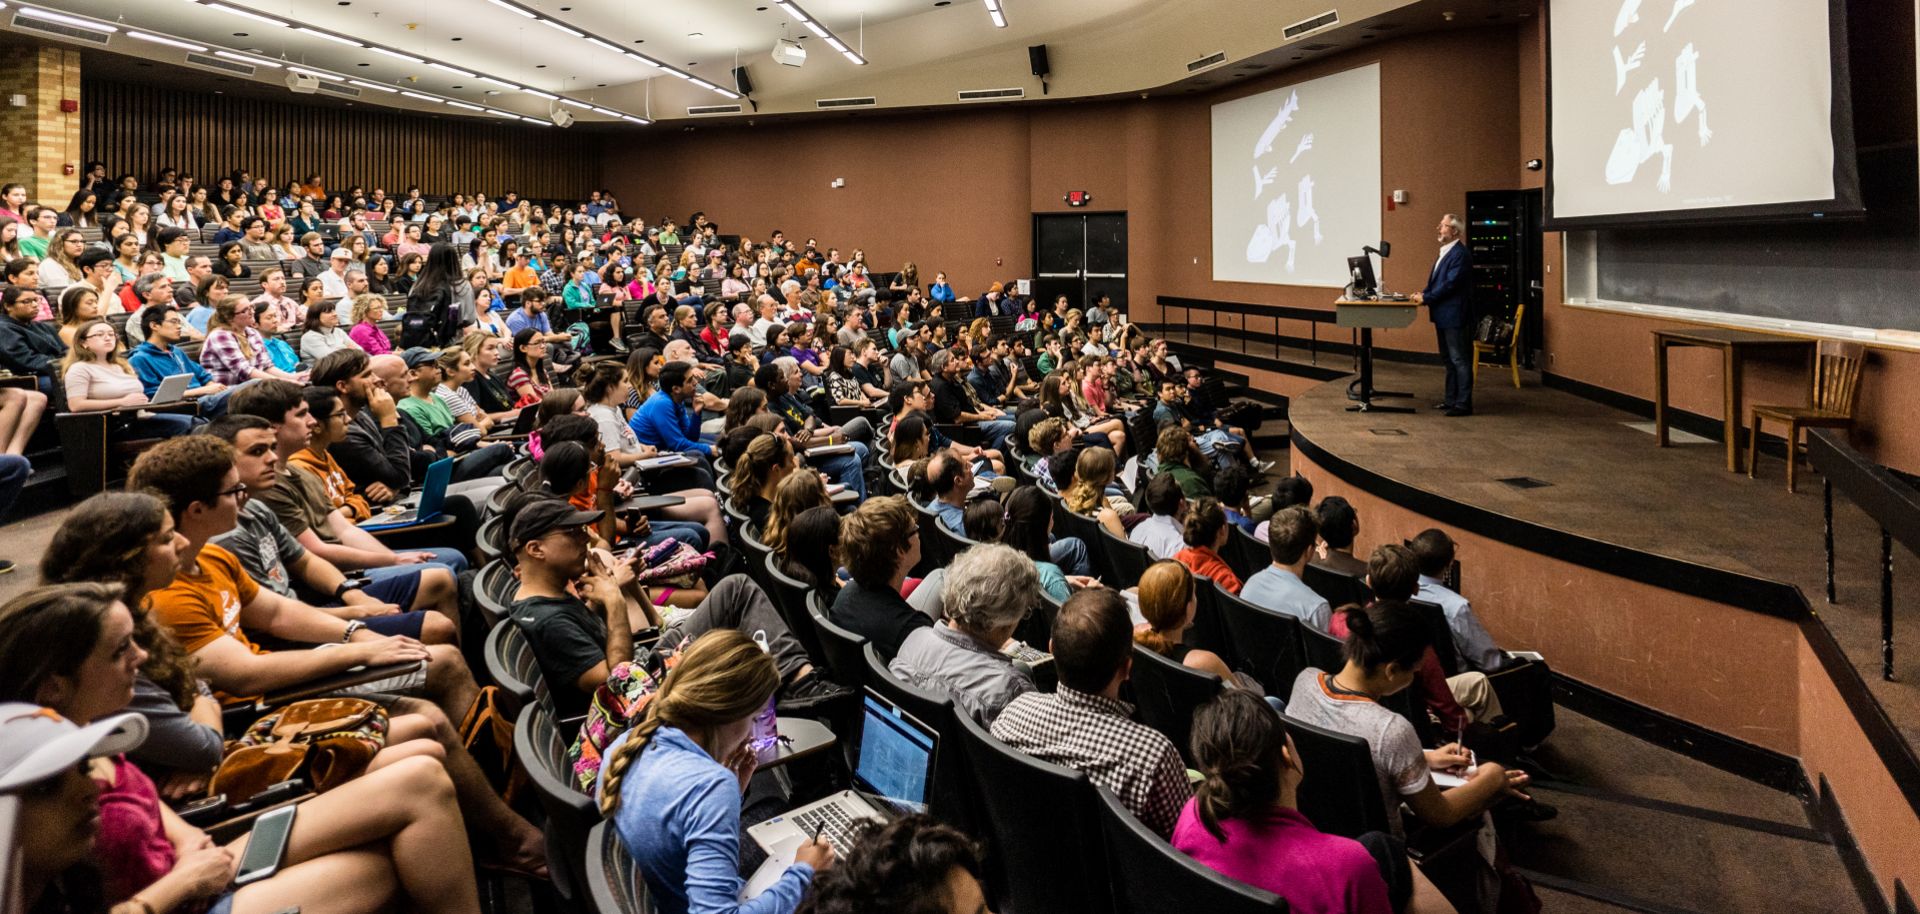 University students in an auditorium listen to their lecturer. Despite the success of the modern university, increasing numbers of people seem to see academically free universities as a luxury they no longer wish to support.